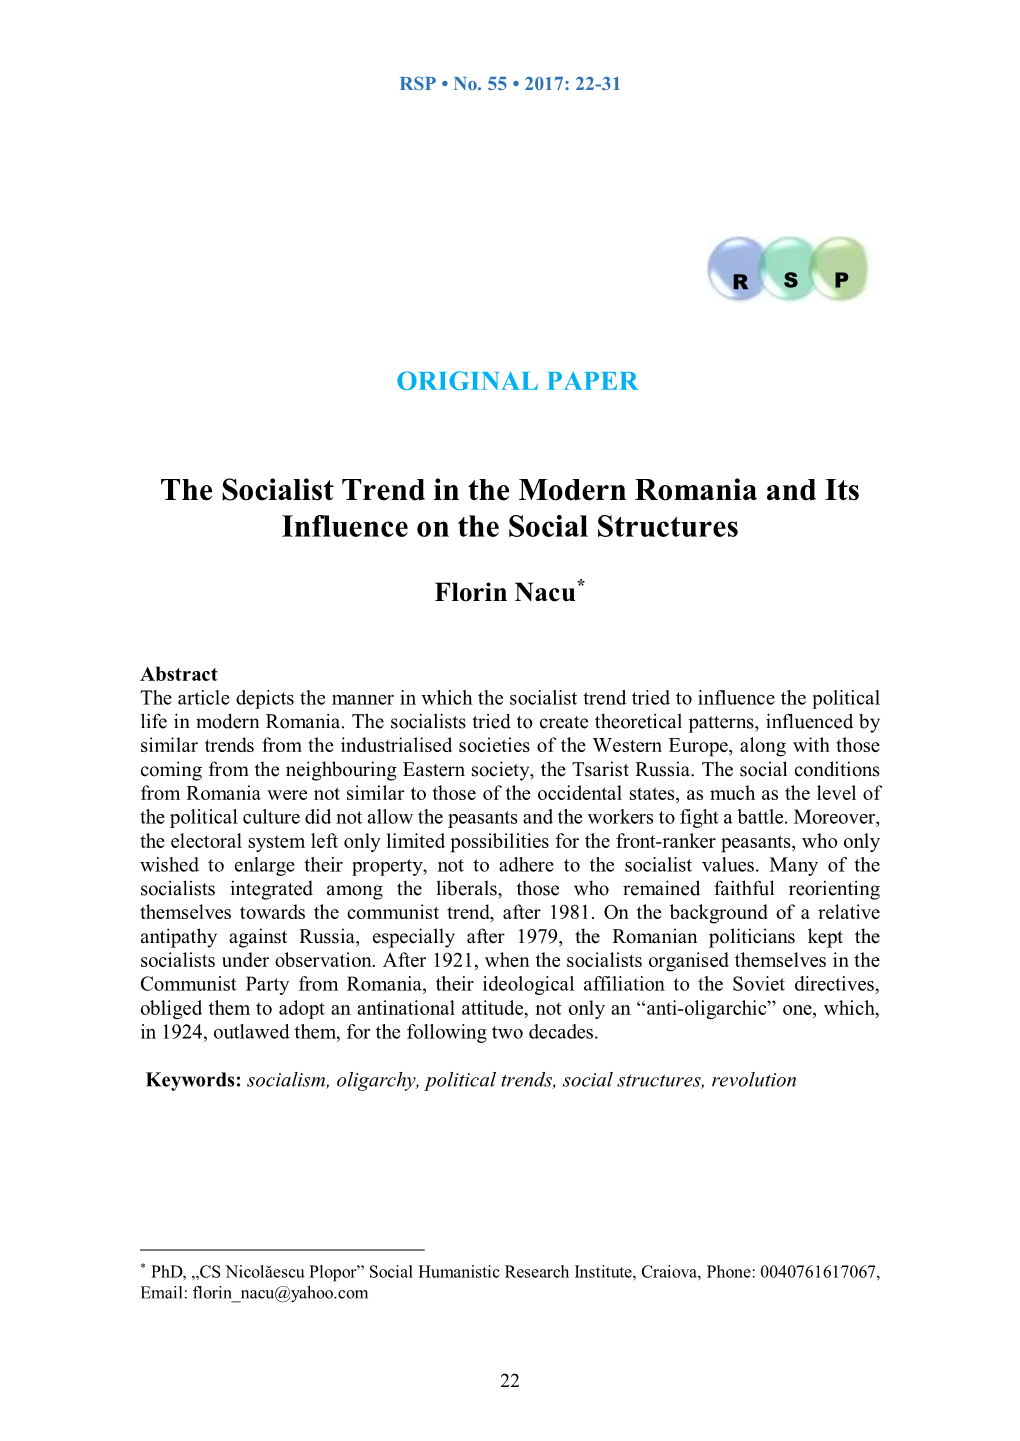 The Socialist Trend in the Modern Romania and Its Influence on the Social Structures